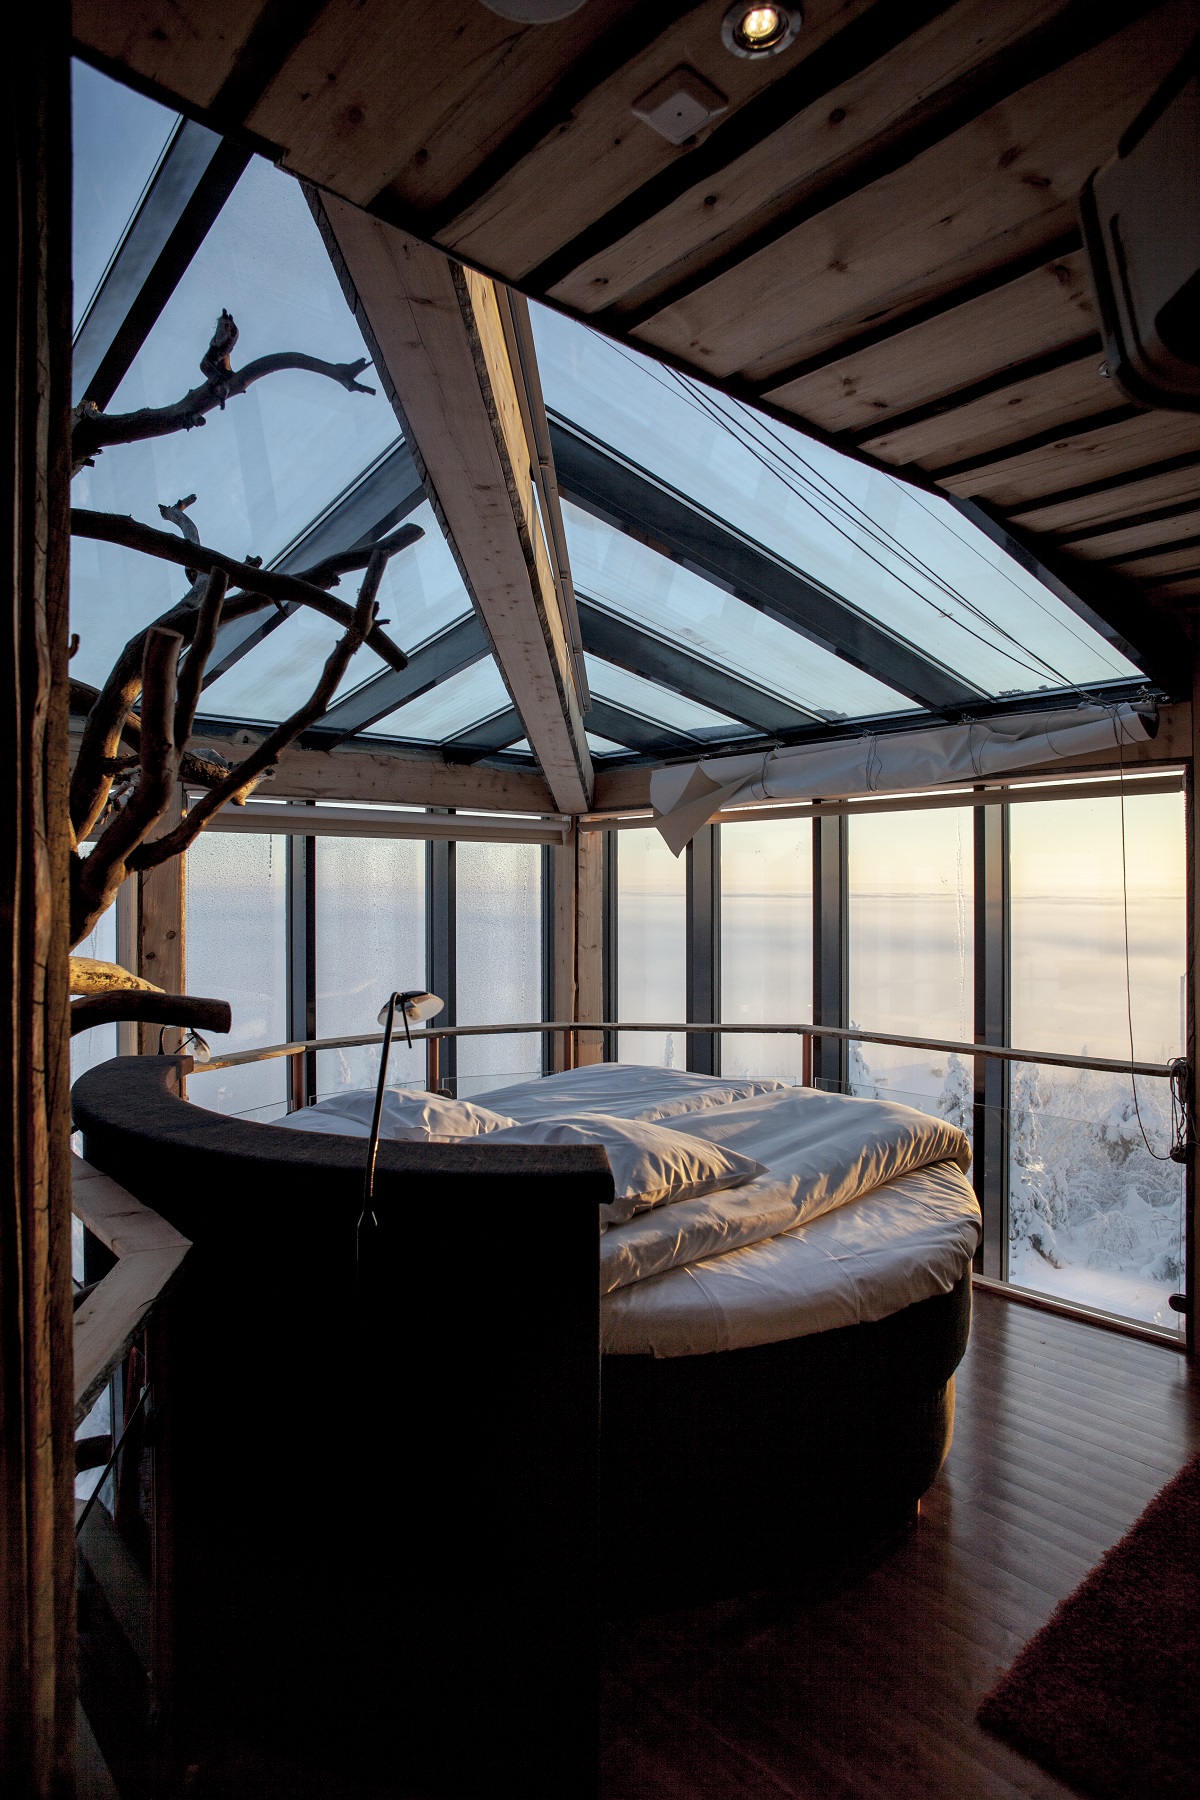 bedroom cool dream suite designs eagles night glass roof tree bedrooms amazing ceiling bed most window hotel finland iso treehouse